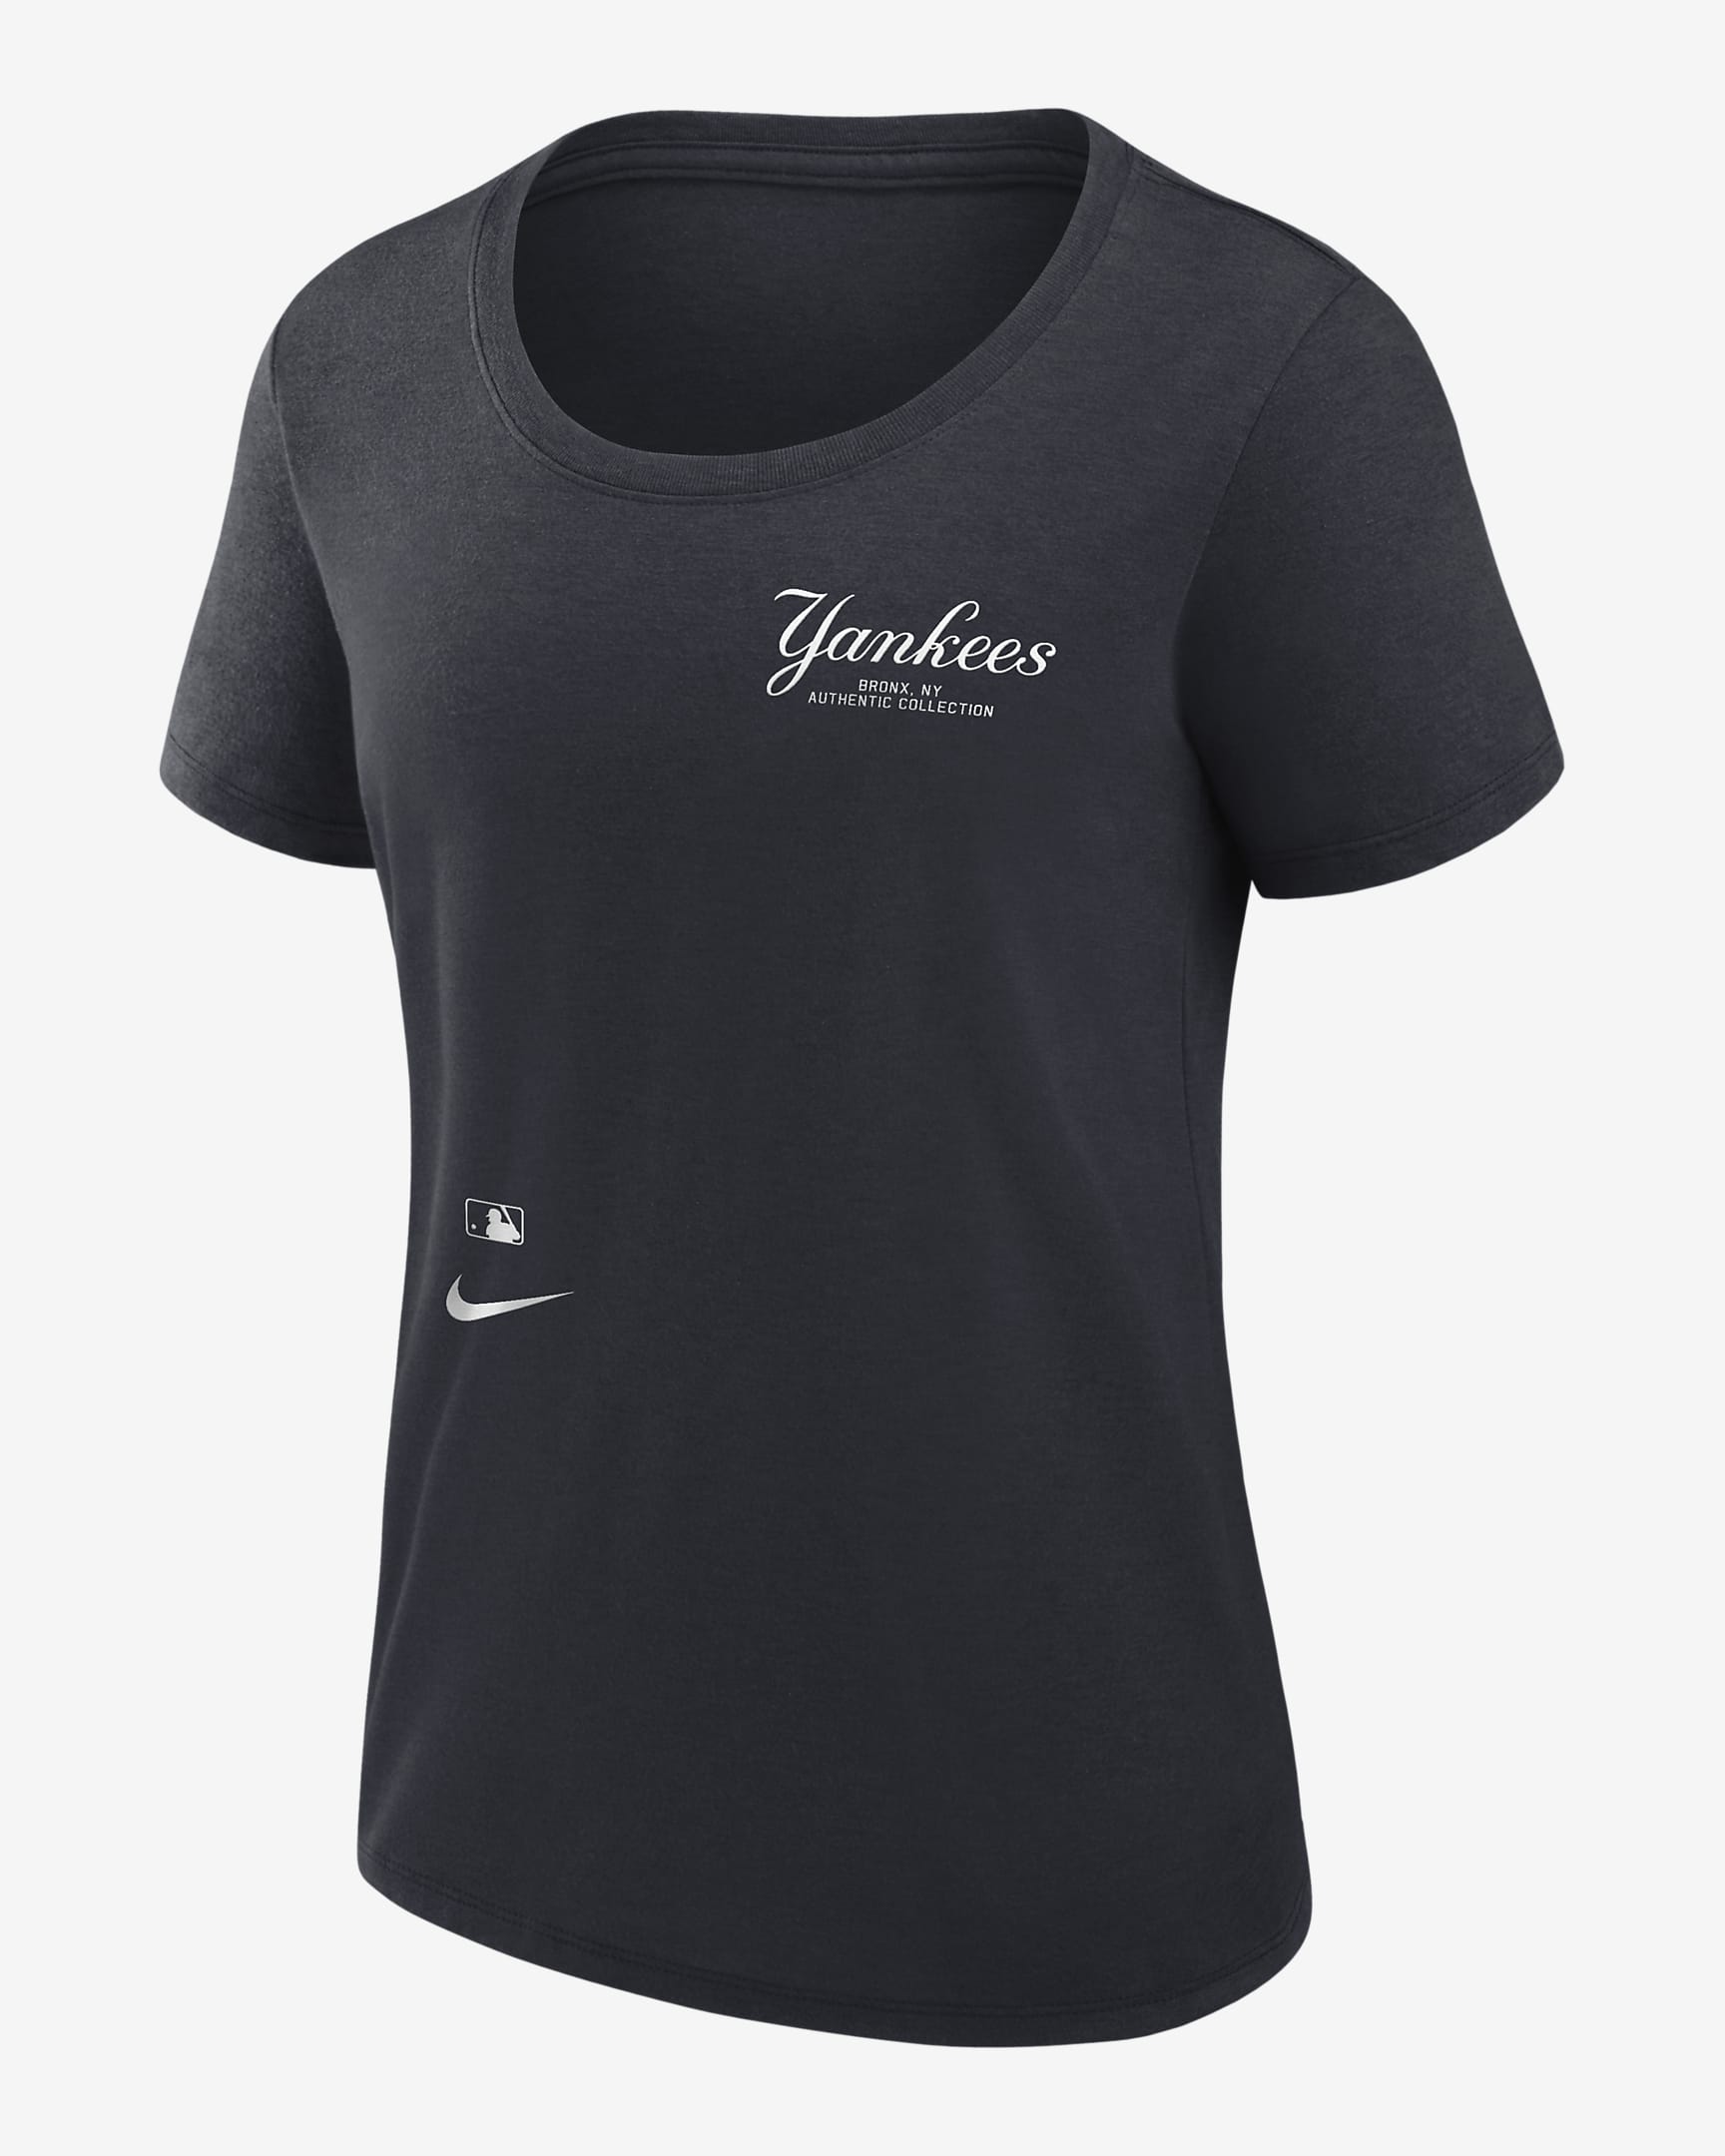 New York Yankees Authentic Collection Early Work Women's Nike Dri-FIT ...